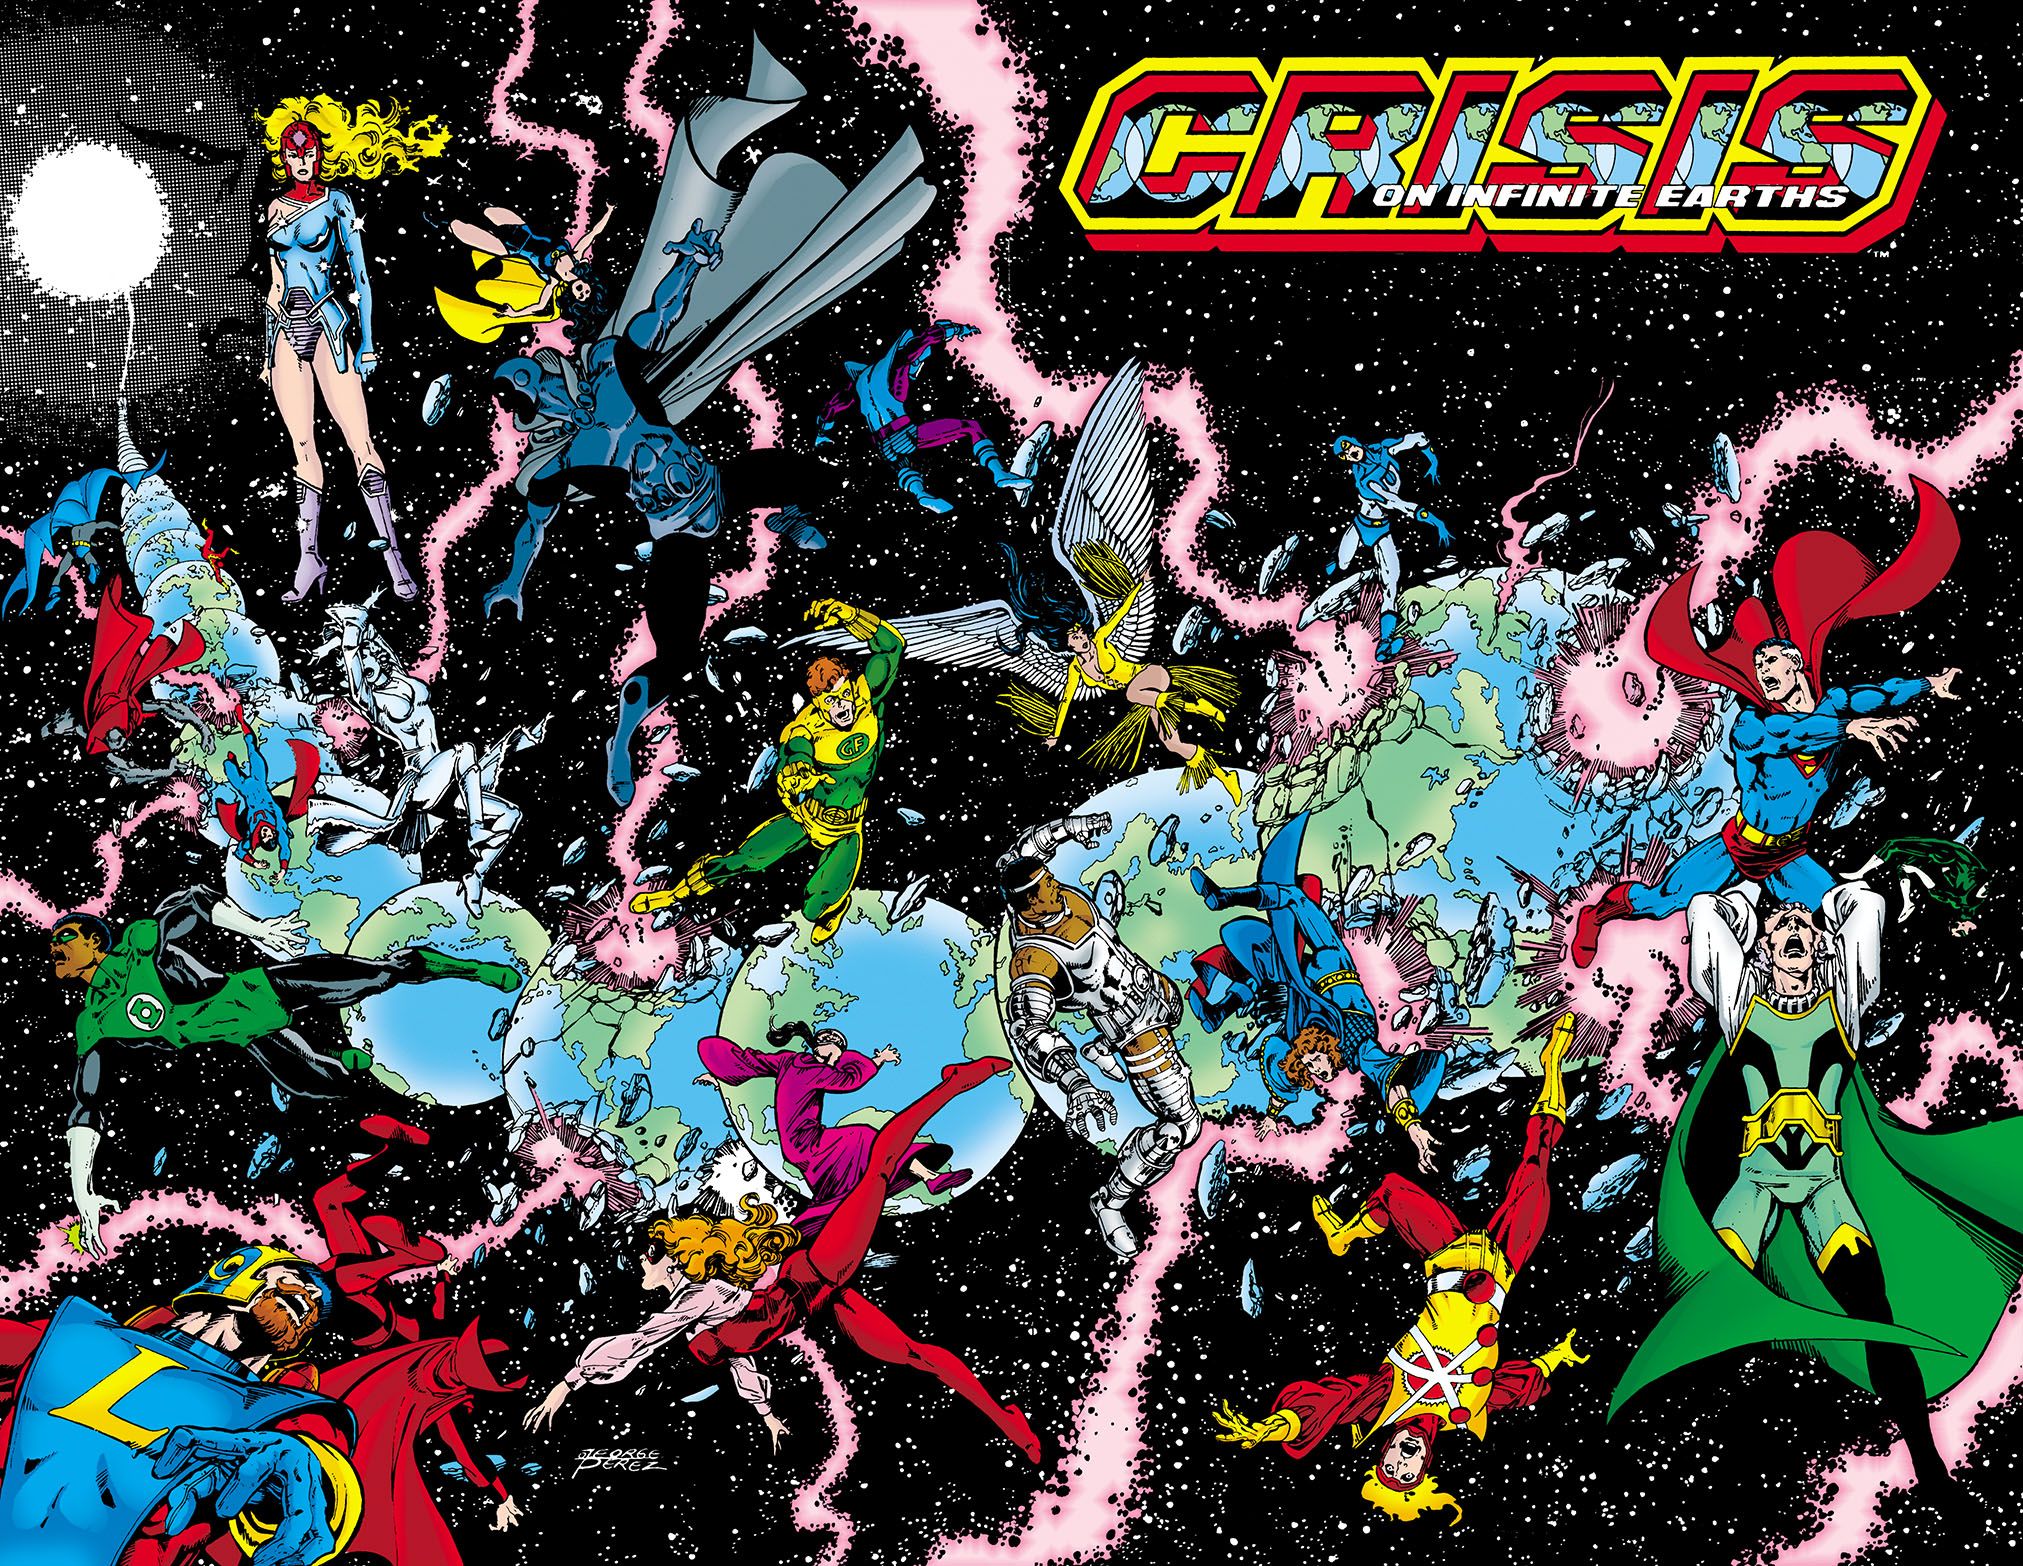 Crisis on Infinite Earths 1 cover, featuring a variety of DC heroes.